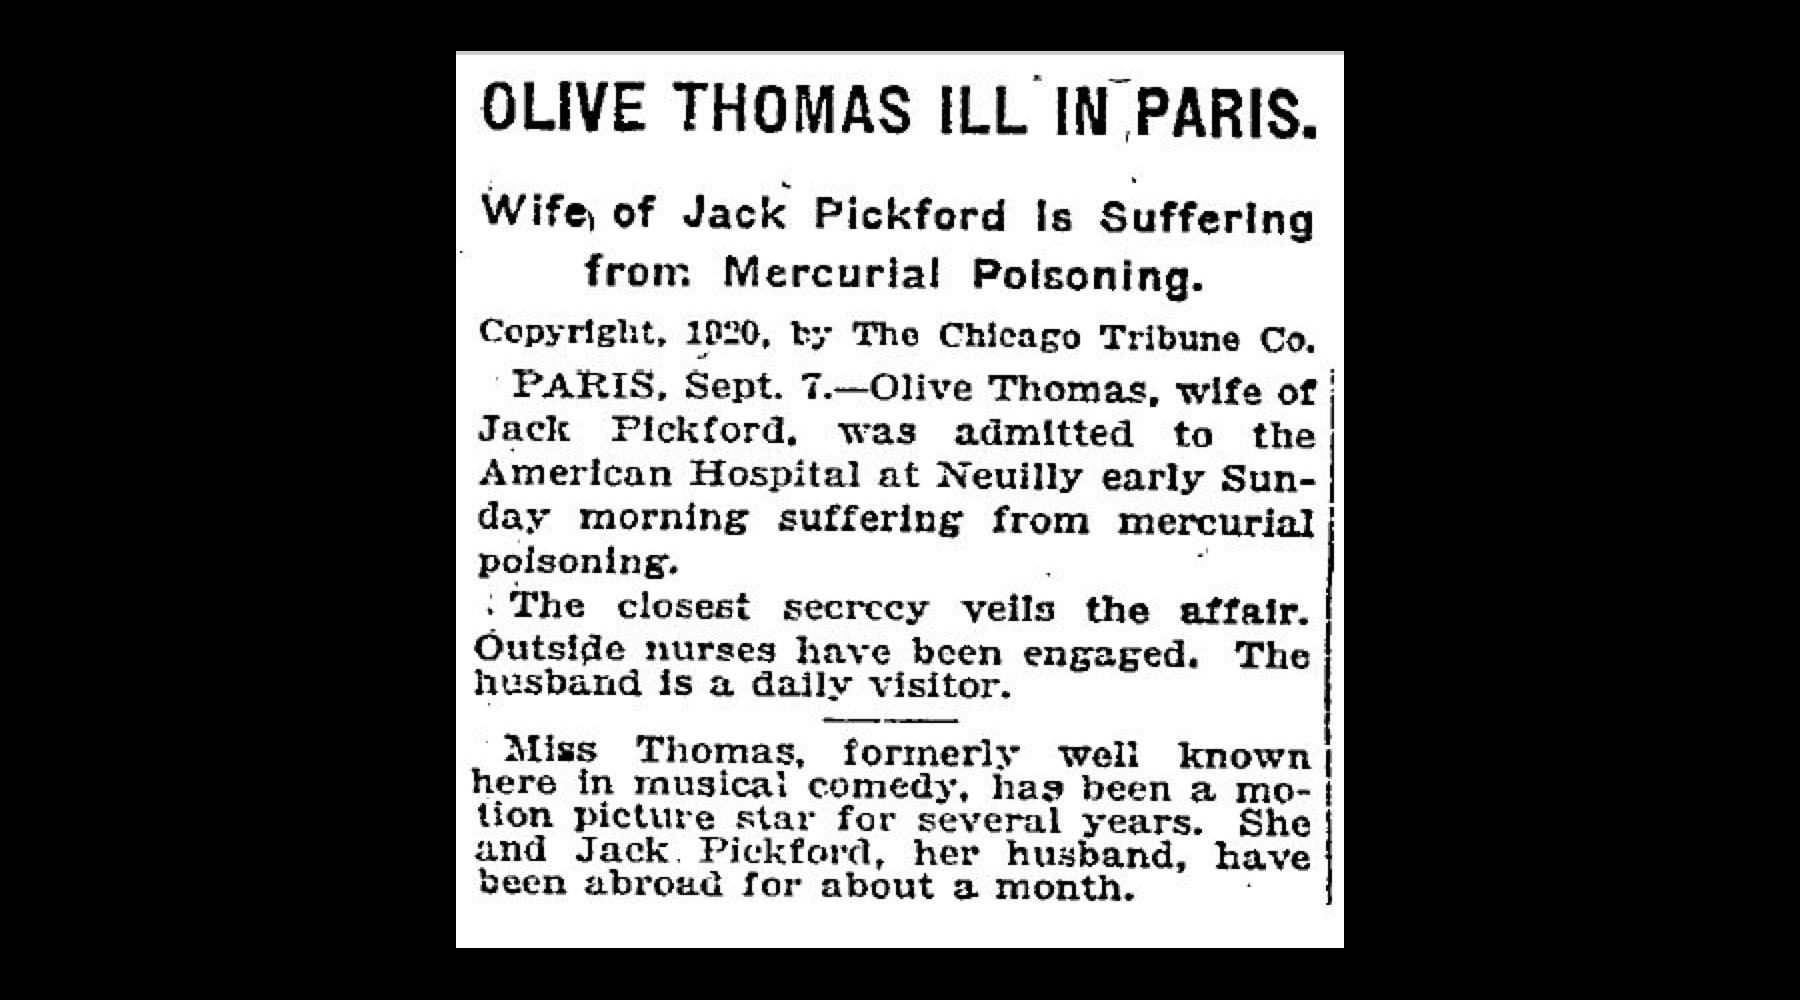 Olive drank poison around 3 a.m. at the Ritz Hotel that night. It's unclear if Jack was there at the time or if he was out.